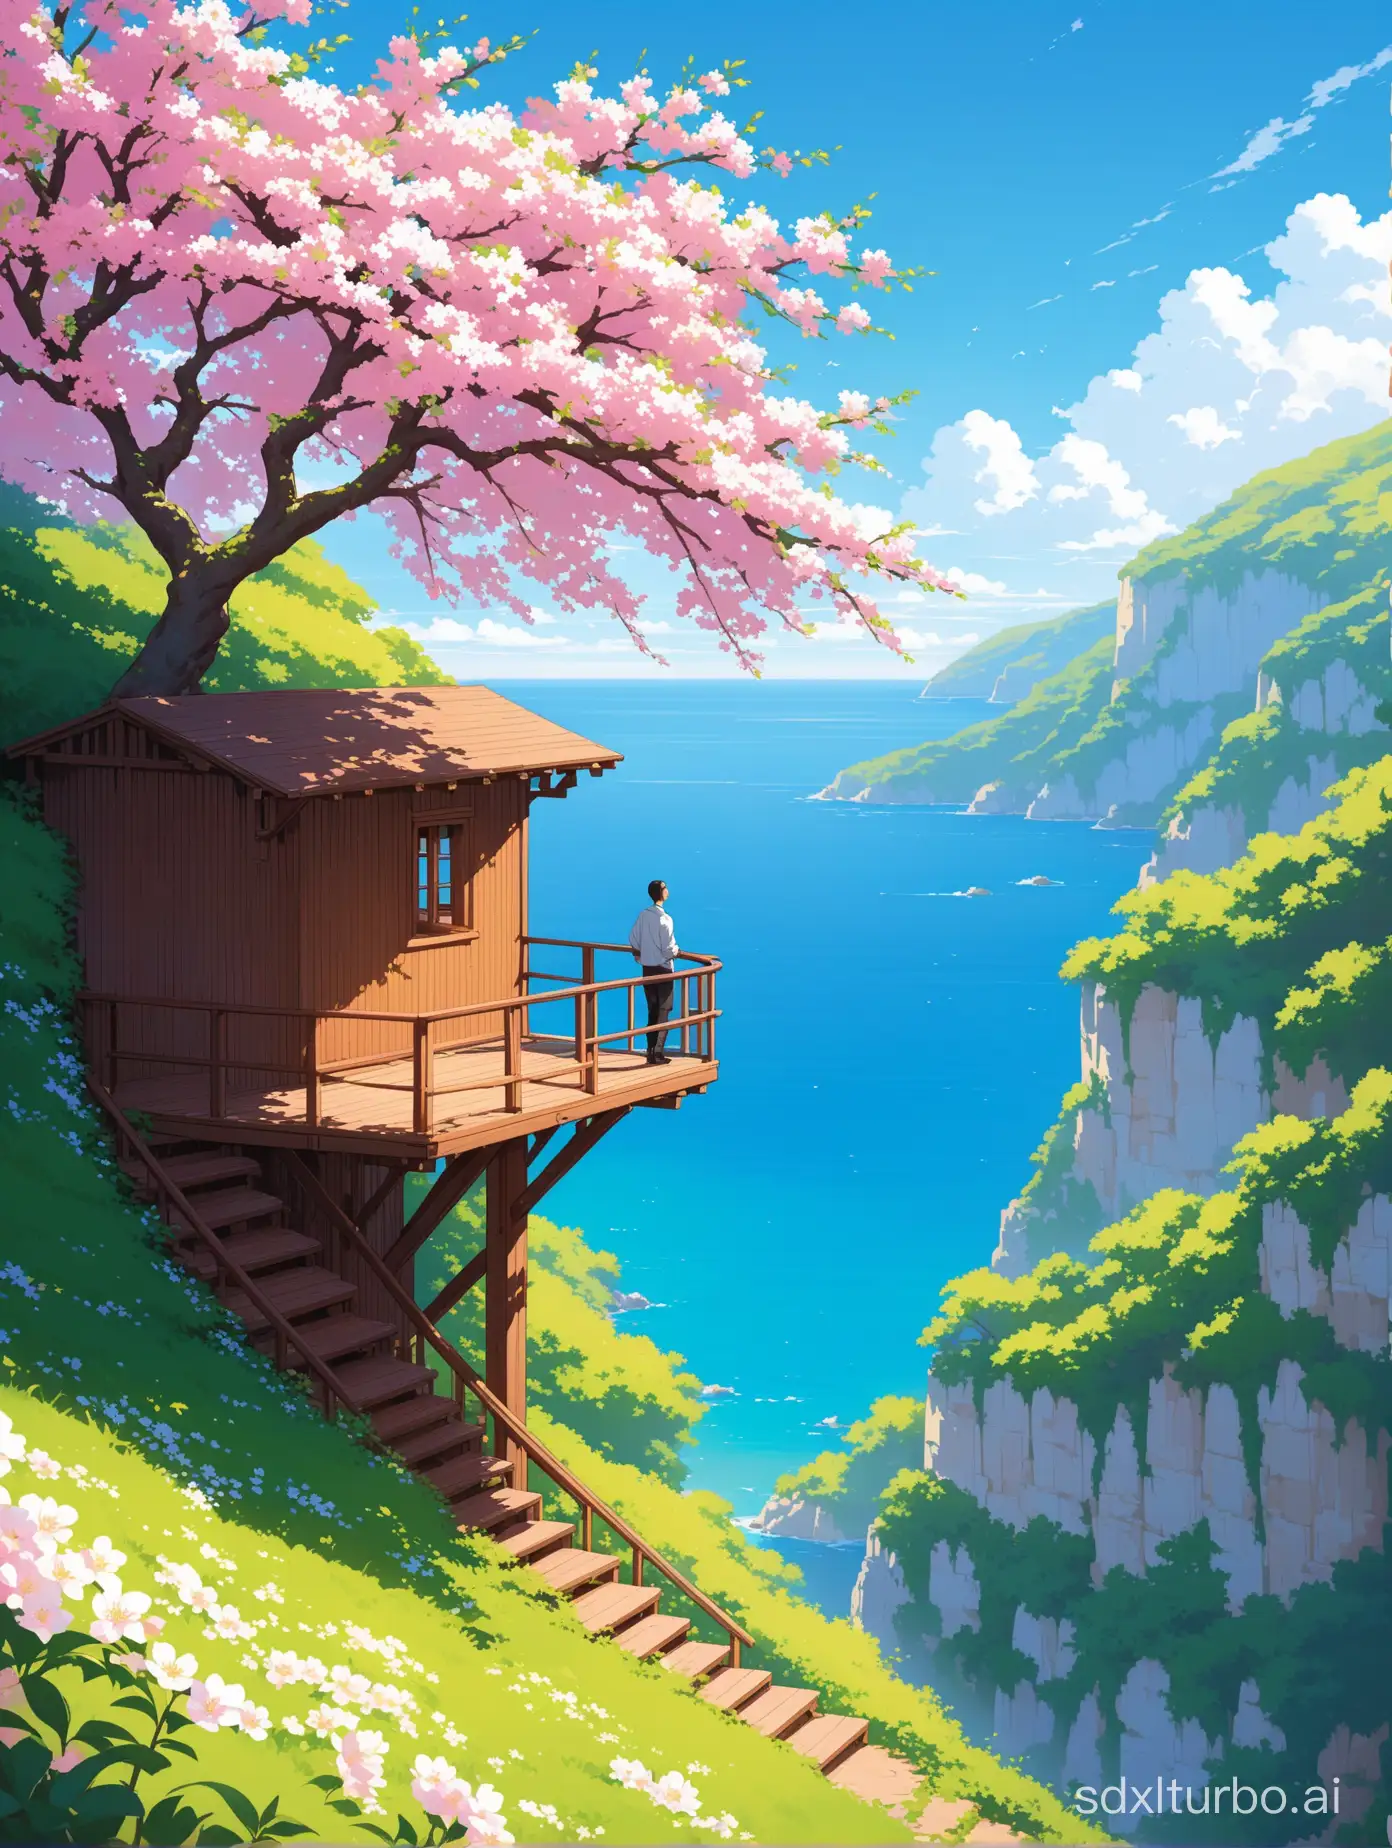  peaceful cliffside scene with a lush, blooming tree as the focal point. There should be a wooden structure with stairs leading down, and a person contemplating the clear blue sky.